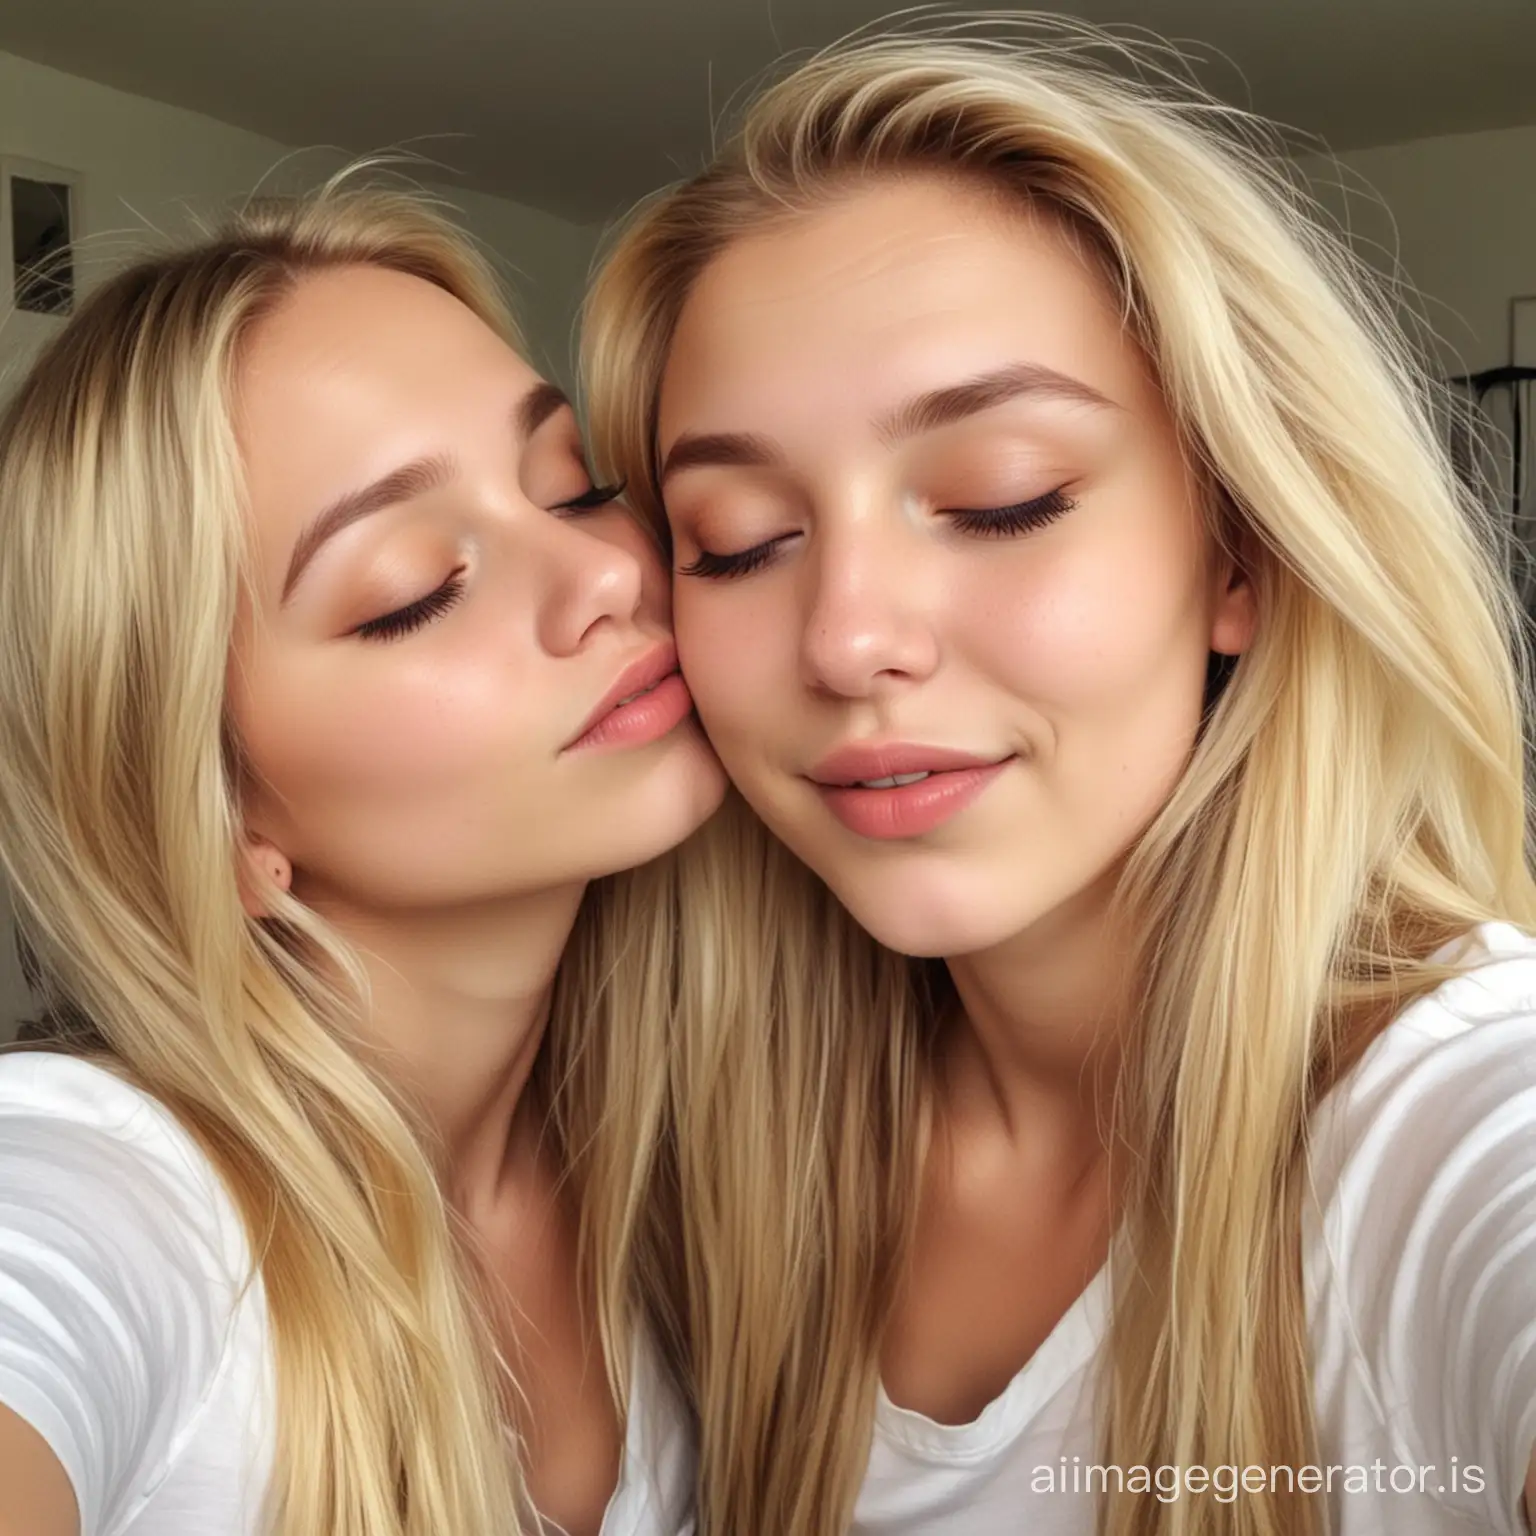 female, 14 years old, blonde hair, eyes closed, taking a selfie, full body, kissing a girl facing each other